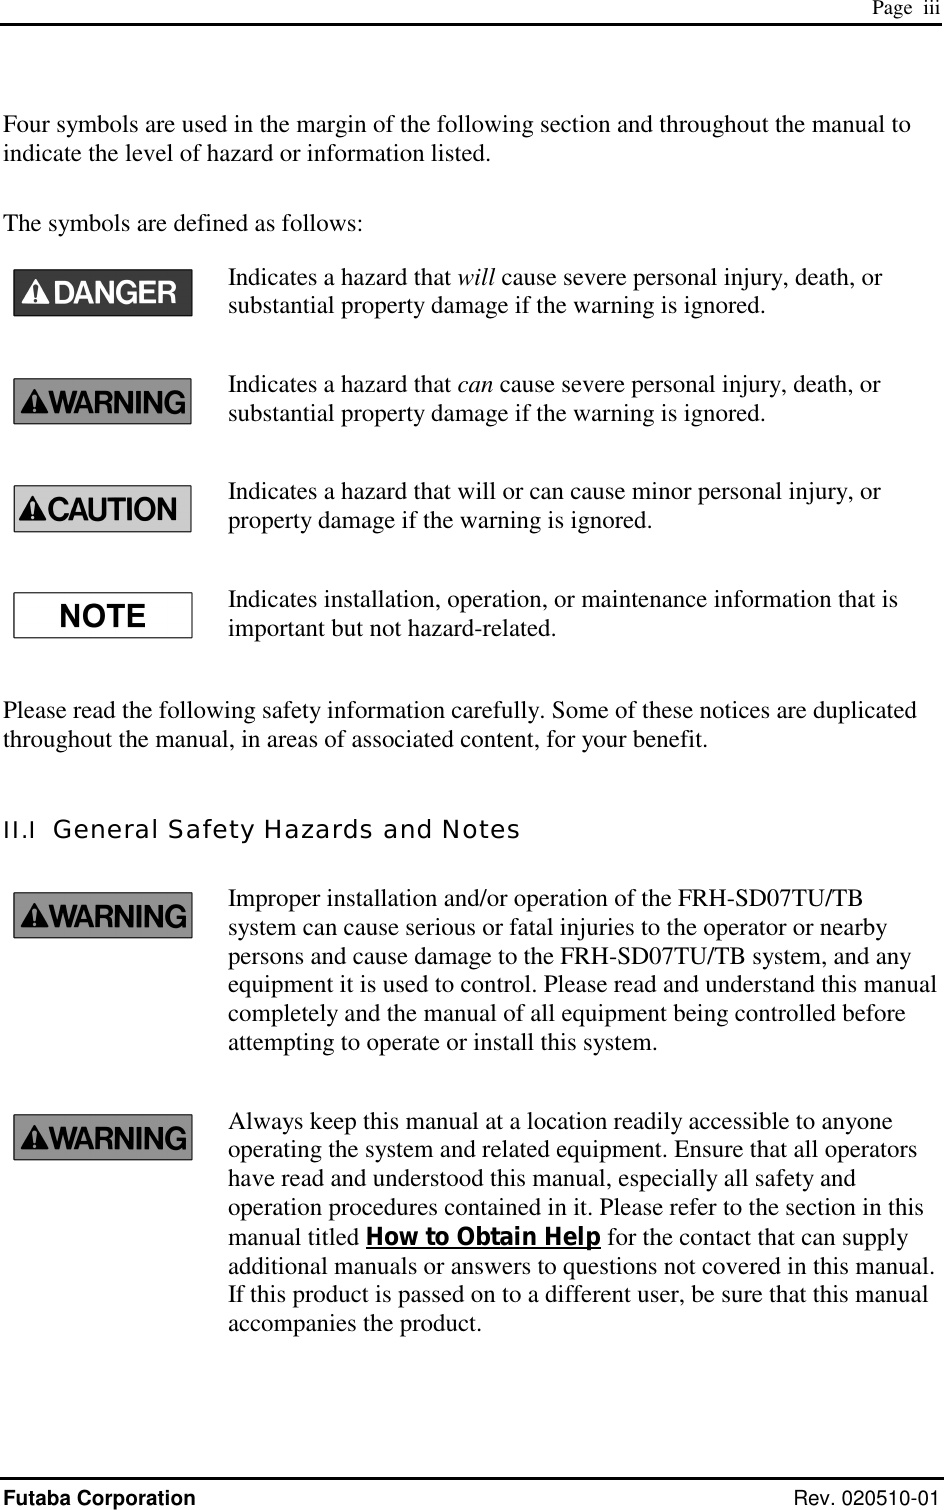  Page  iii Futaba Corporation Rev. 020510-01 Four symbols are used in the margin of the following section and throughout the manual to indicate the level of hazard or information listed.  The symbols are defined as follows: Indicates a hazard that will cause severe personal injury, death, or substantial property damage if the warning is ignored. Indicates a hazard that can cause severe personal injury, death, or substantial property damage if the warning is ignored. Indicates a hazard that will or can cause minor personal injury, or property damage if the warning is ignored. Indicates installation, operation, or maintenance information that is important but not hazard-related.  Please read the following safety information carefully. Some of these notices are duplicated throughout the manual, in areas of associated content, for your benefit.  II.I  General Safety Hazards and Notes Improper installation and/or operation of the FRH-SD07TU/TB system can cause serious or fatal injuries to the operator or nearby persons and cause damage to the FRH-SD07TU/TB system, and any equipment it is used to control. Please read and understand this manual completely and the manual of all equipment being controlled before attempting to operate or install this system. Always keep this manual at a location readily accessible to anyone operating the system and related equipment. Ensure that all operators have read and understood this manual, especially all safety and operation procedures contained in it. Please refer to the section in this manual titled How to Obtain Help for the contact that can supply additional manuals or answers to questions not covered in this manual. If this product is passed on to a different user, be sure that this manual accompanies the product. 